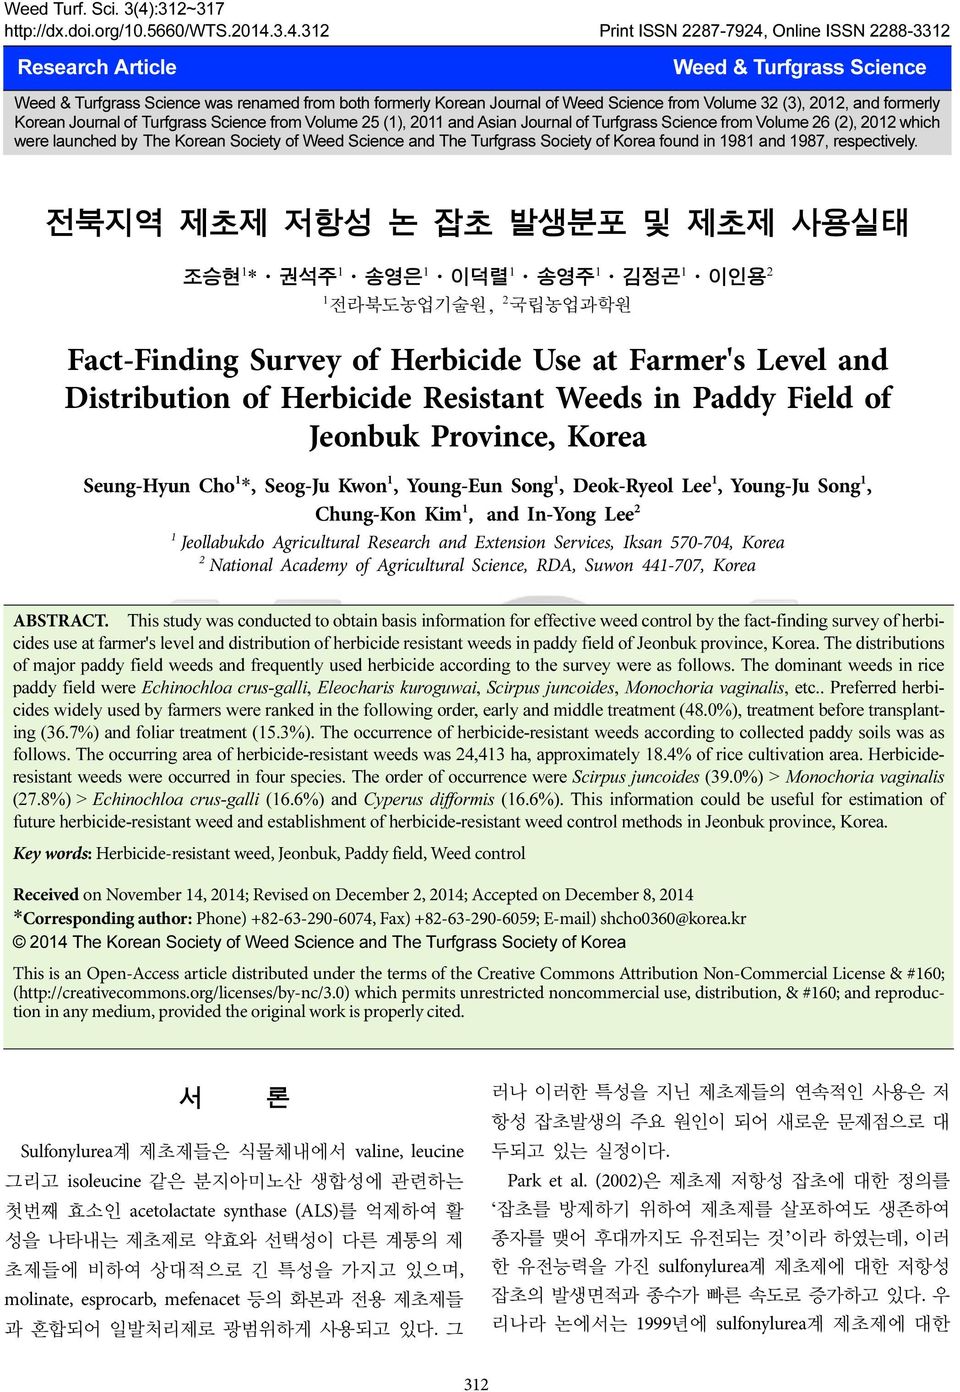 3.4.312 Print ISSN 2287-7924, Online ISSN 2288-3312 Research Article Weed & Turfgrass Science Weed & Turfgrass Science was renamed from both formerly Korean Journal of Weed Science from Volume 32